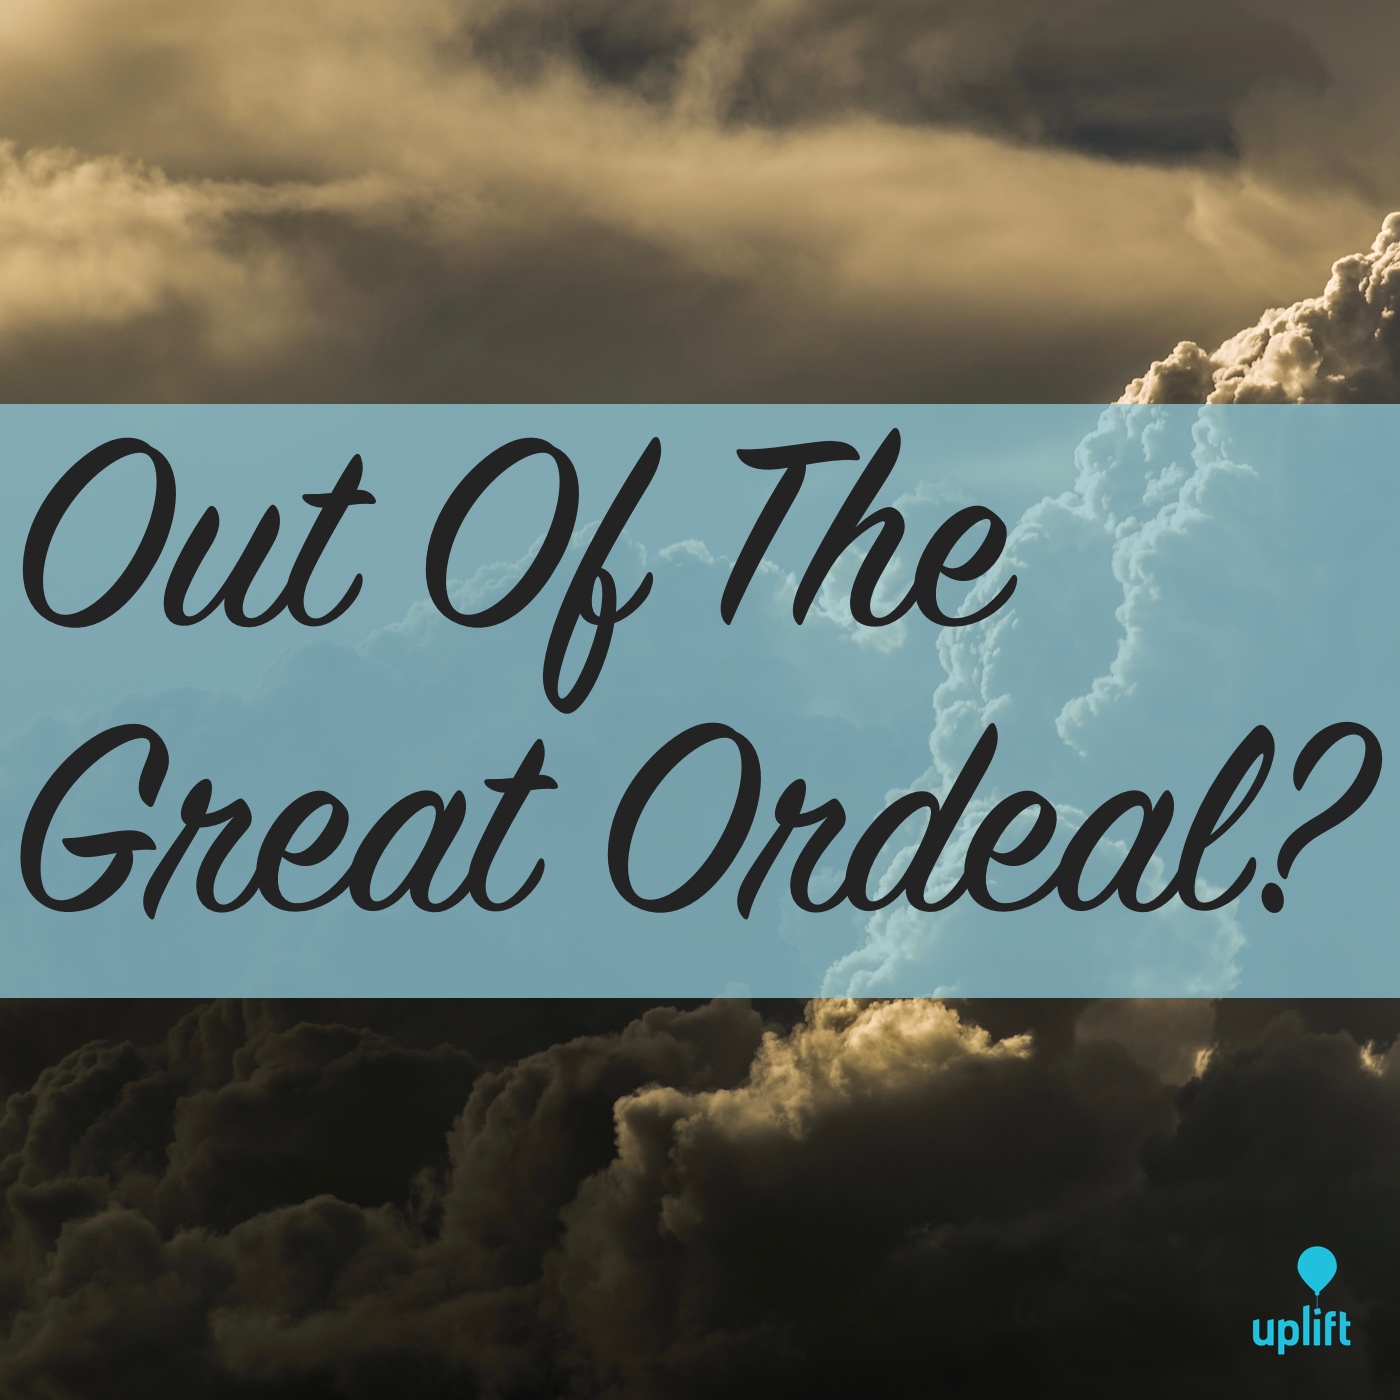 Episode 28: Out Of The Great Ordeal?